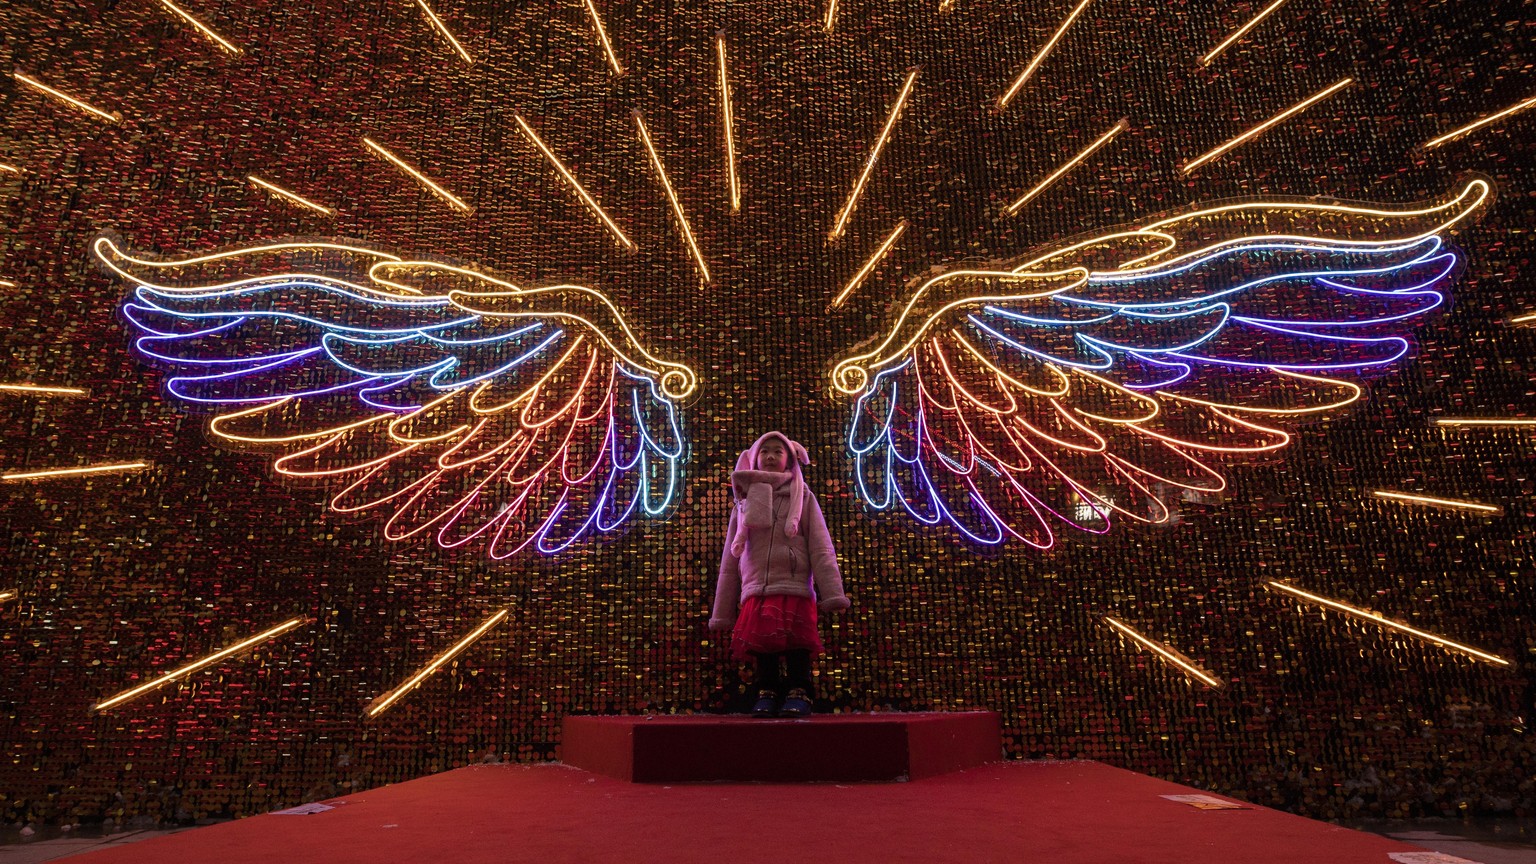 A child poses for photos near wings-shaped neon lights during Christmas Eve in Beijing on Tuesday, Dec. 24, 2019. (AP Photo/Ng Han Guan)